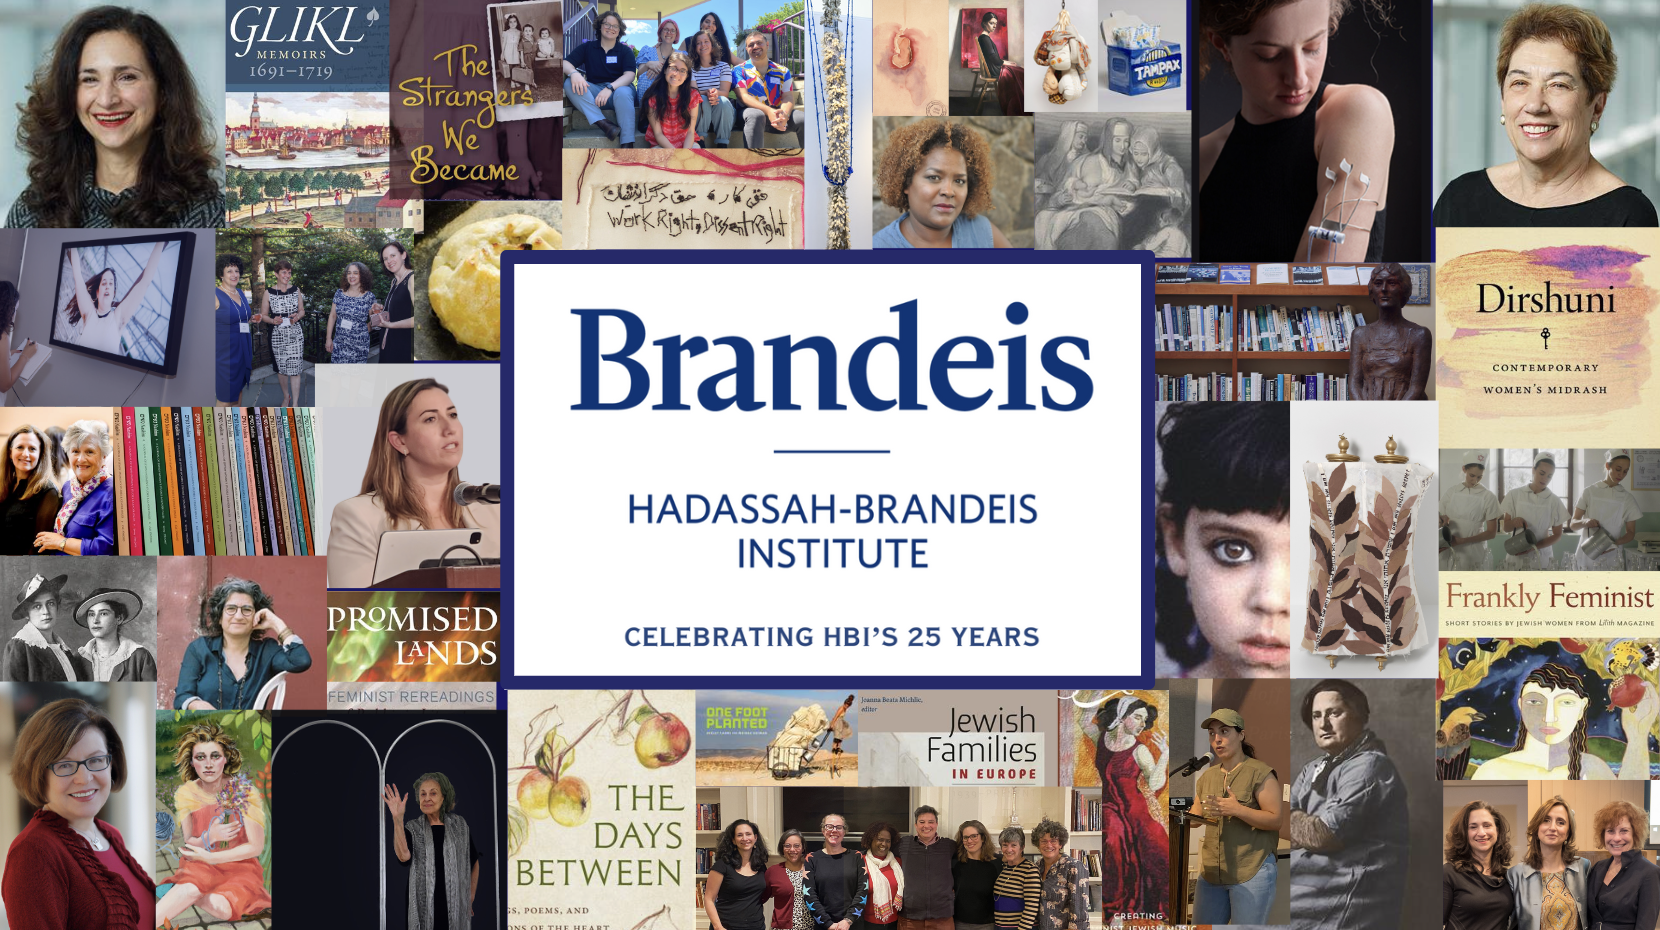 Collage, showing many images of HBI related events, book covers and people, with the words, Brandeis, Hadassah-Brandeis Institute, Celebrating HBI's 25 Years